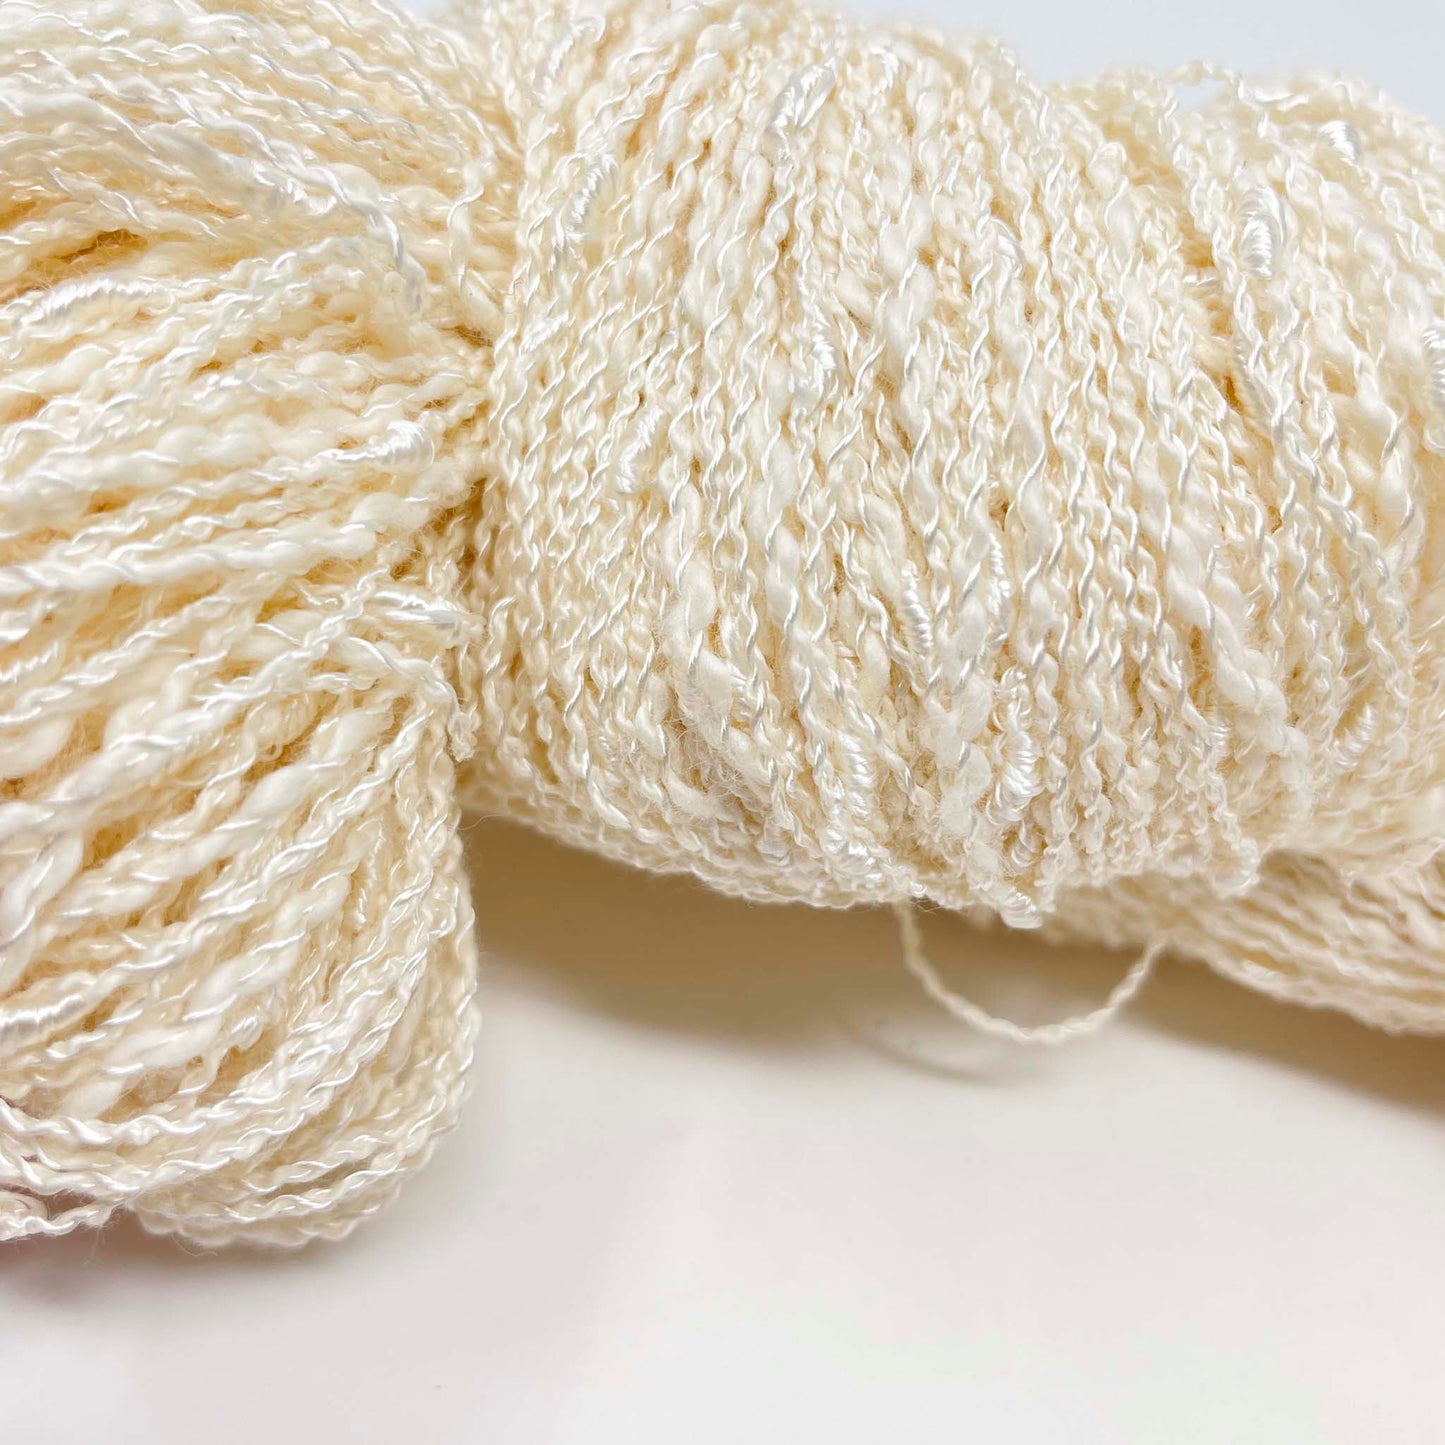 Specialty Shiny Weave Yarn - Natural (7.8 oz)